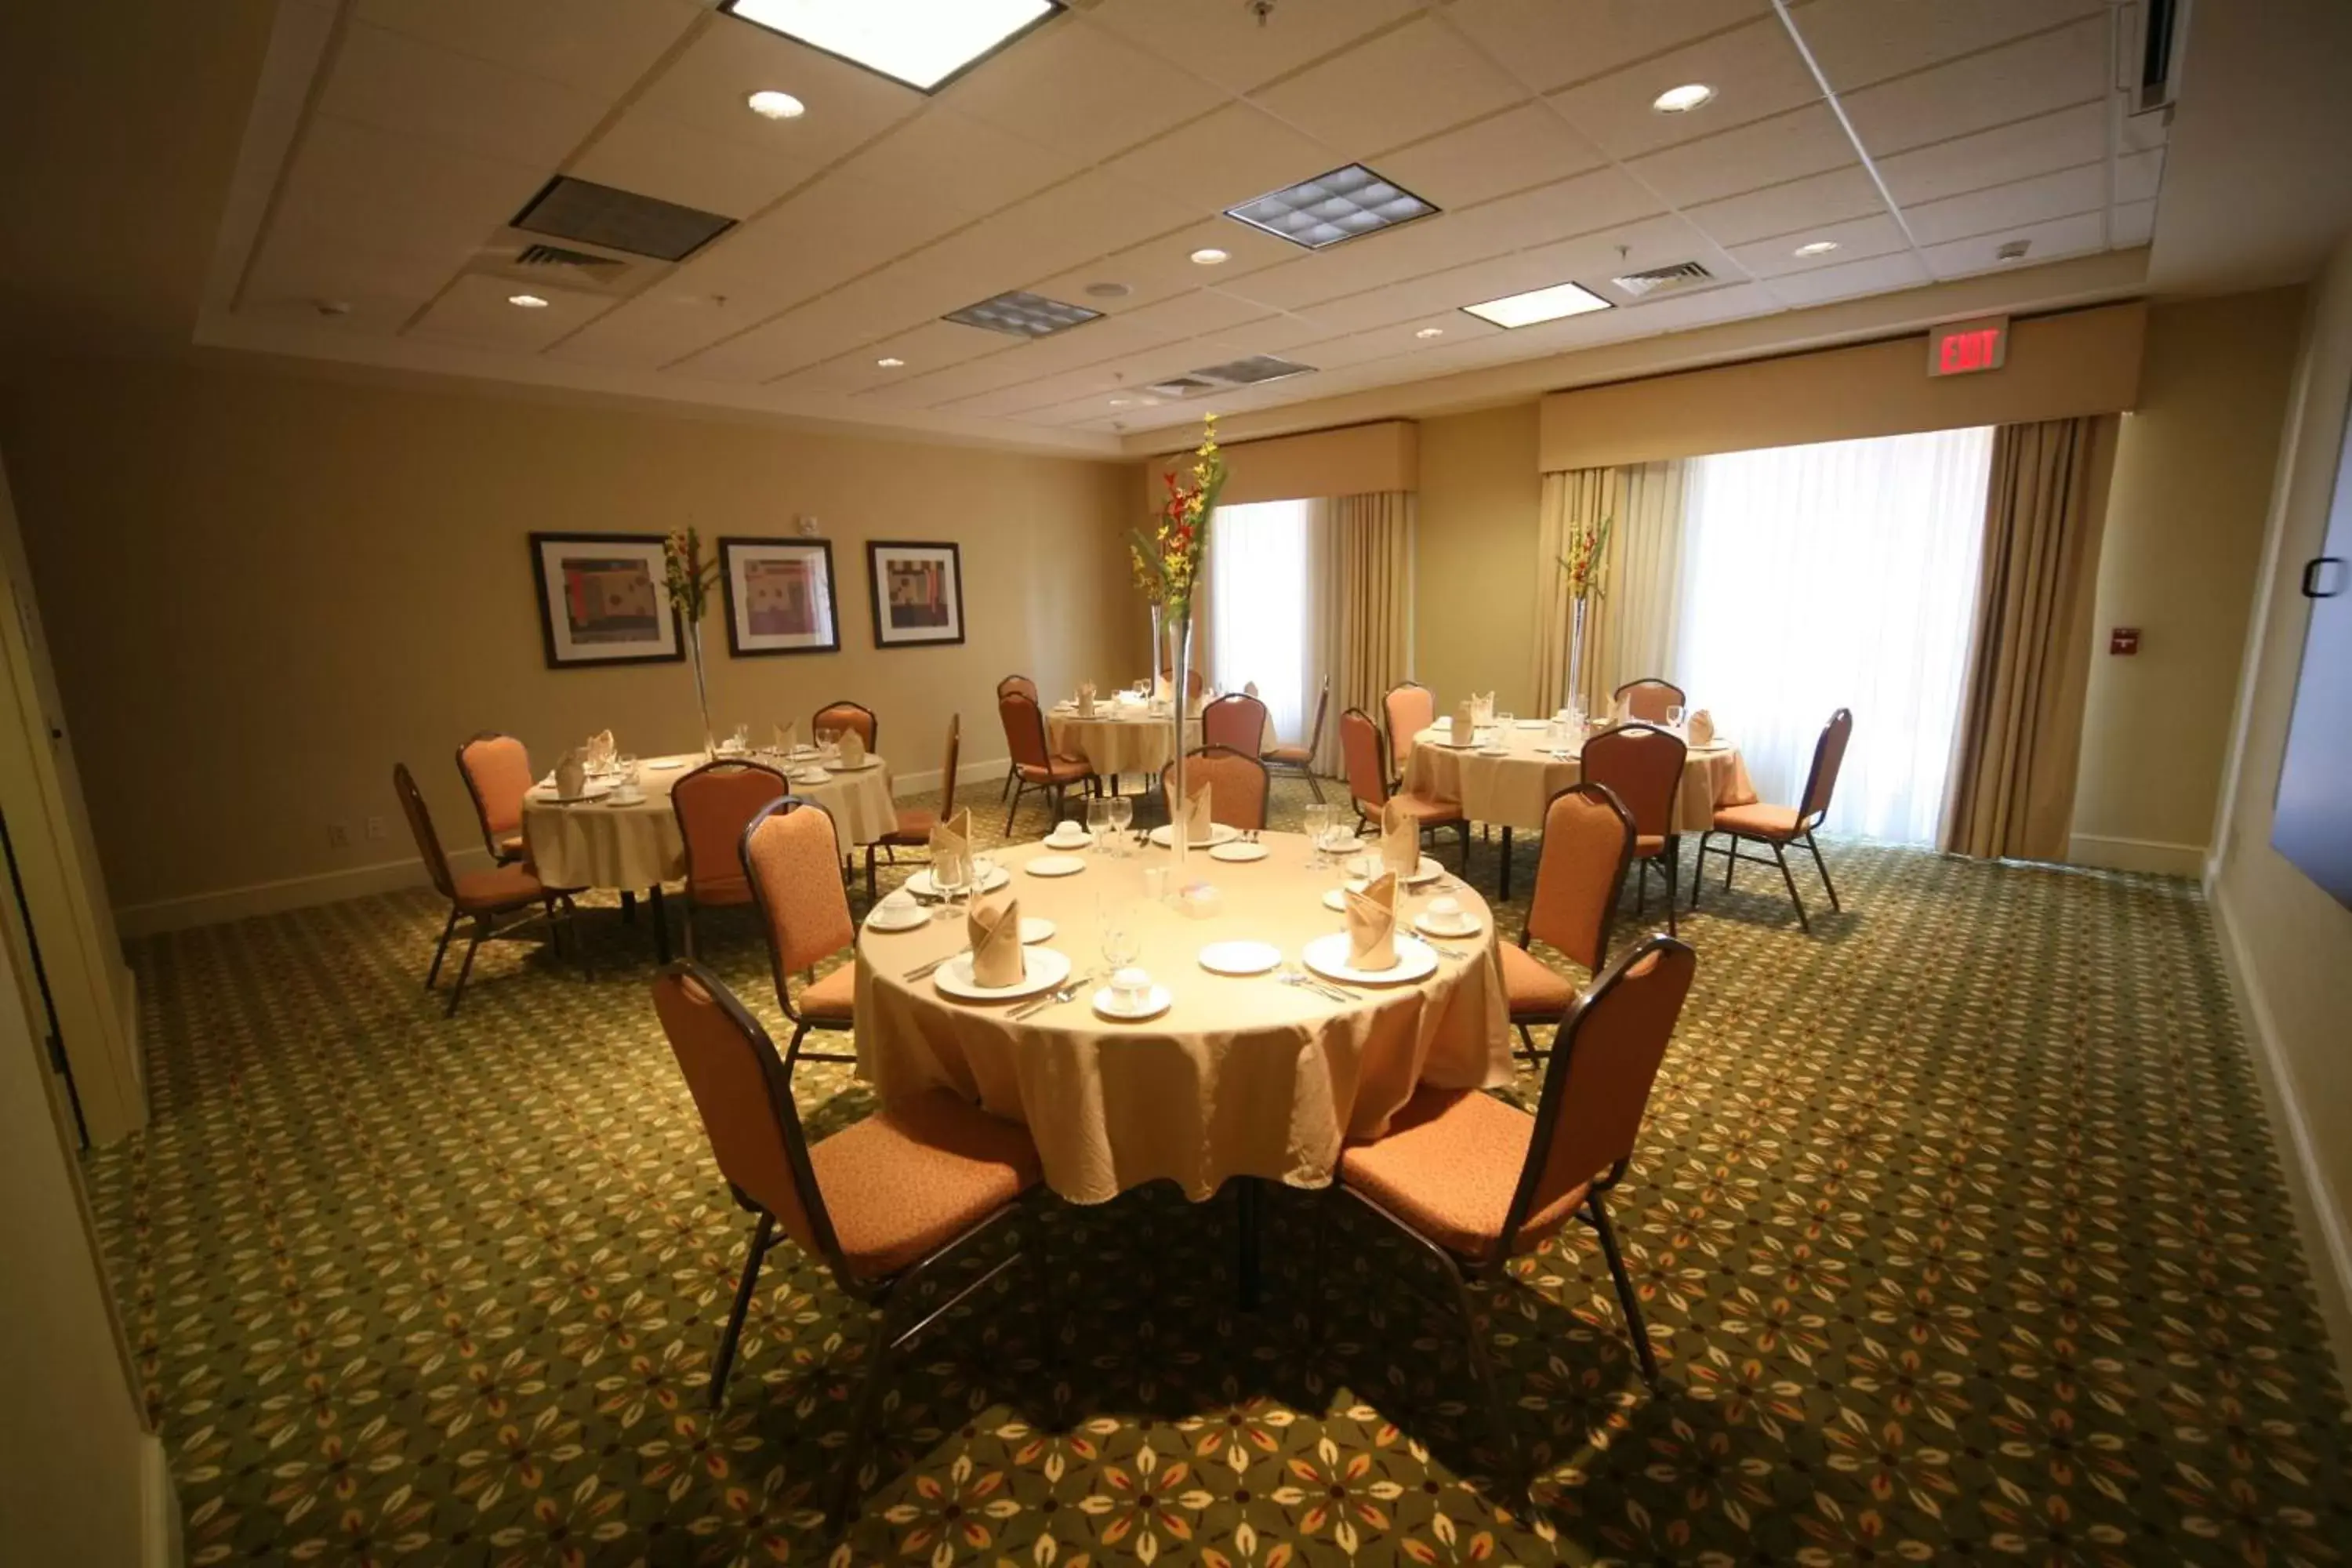 Meeting/conference room, Banquet Facilities in Hilton Garden Inn Anderson